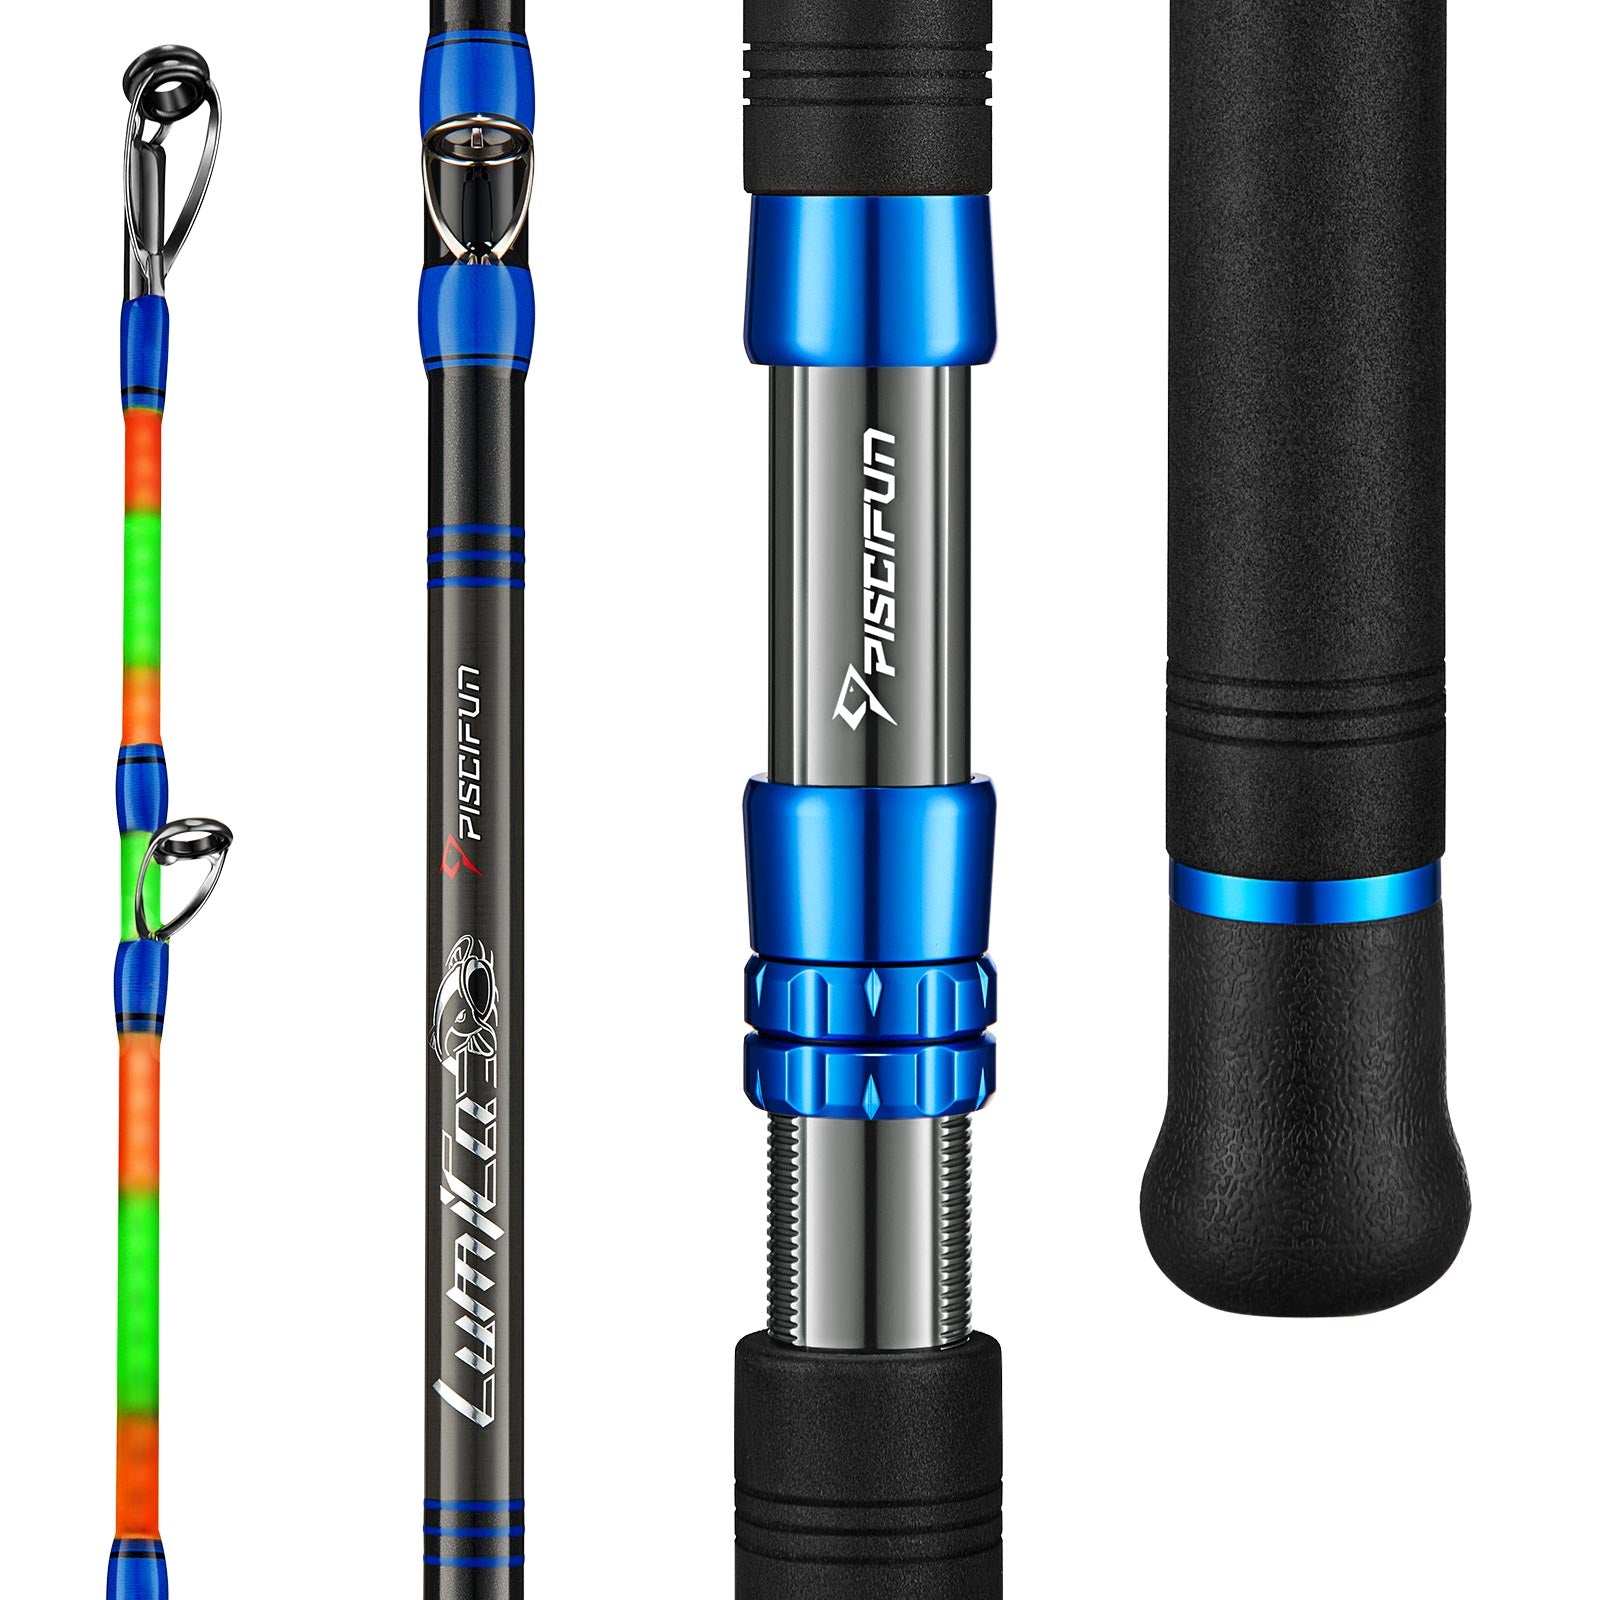 baitcast rods, baitcast rods Suppliers and Manufacturers at